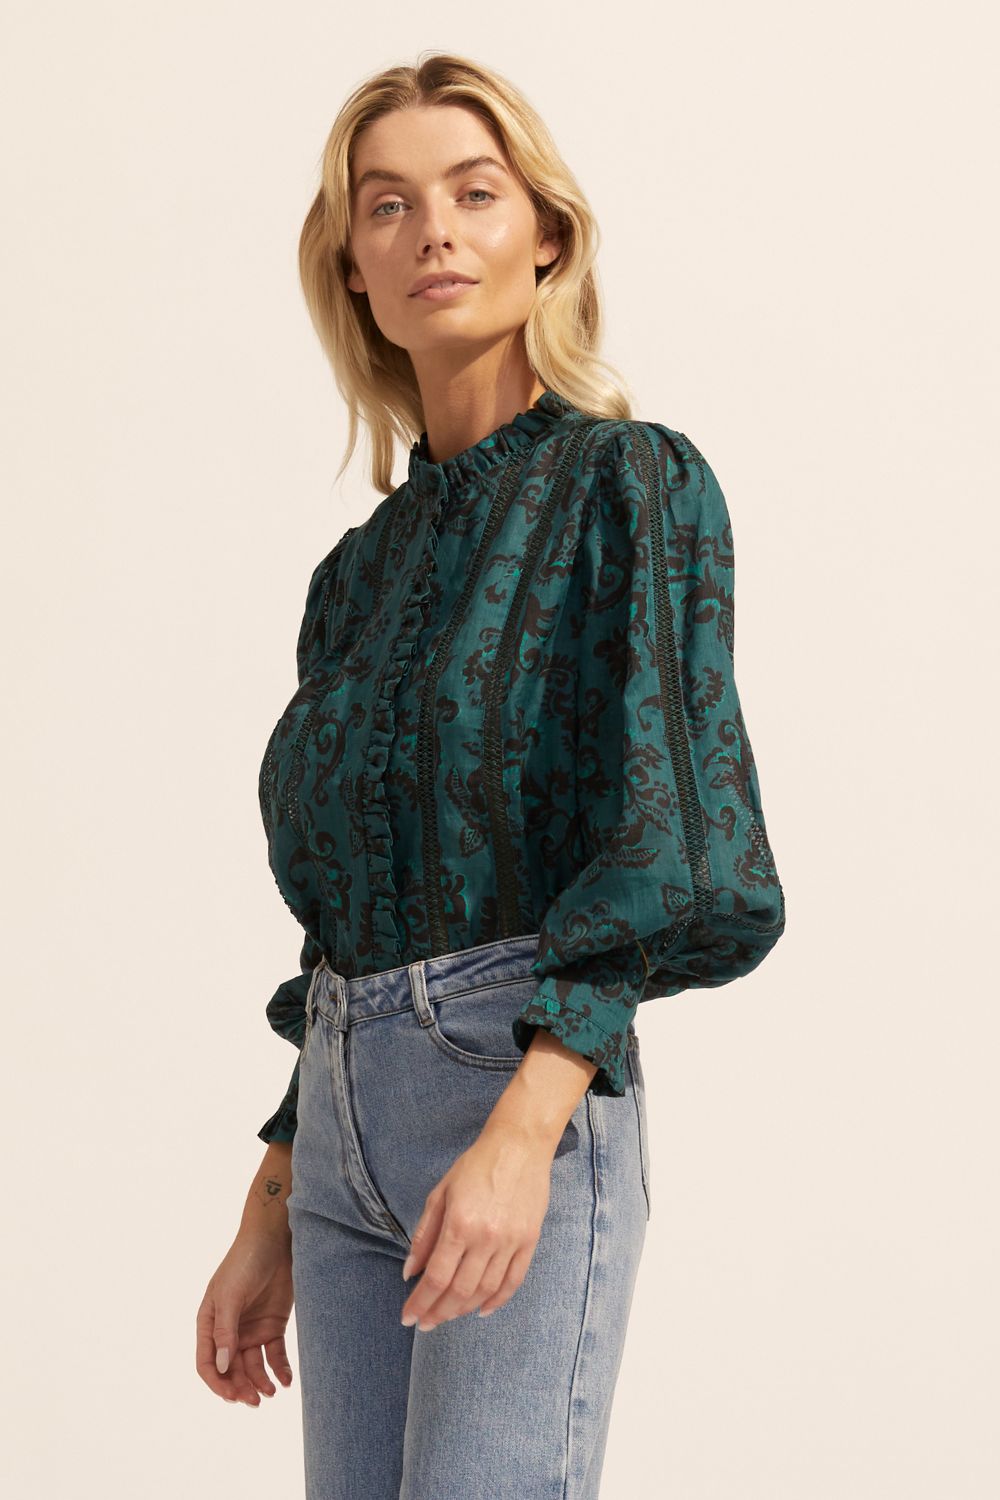 swoon top - green floral